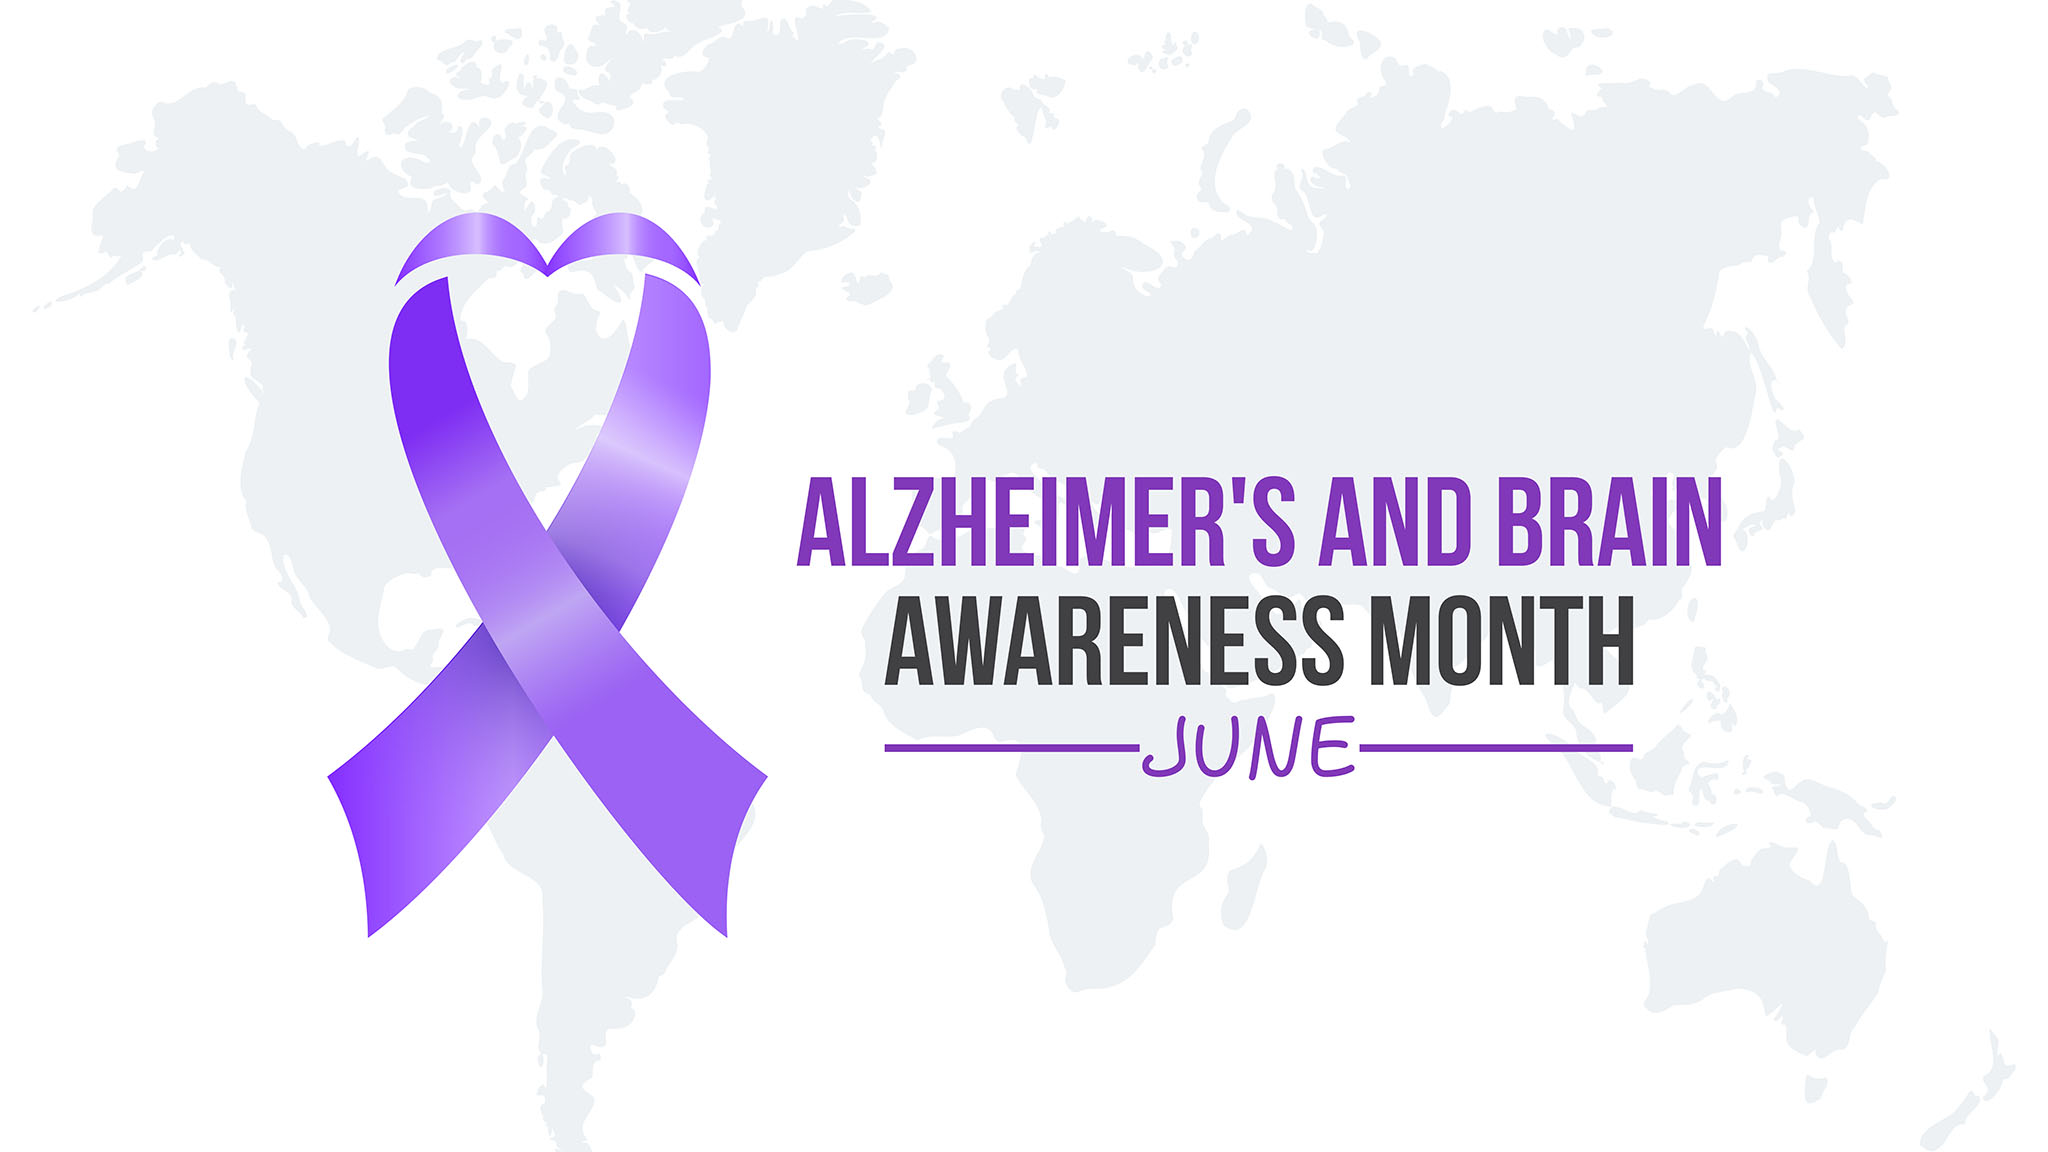 The Compliance Store stands ready to support you and your residents during Alzheimer's and Brain Awareness month - and all year long!